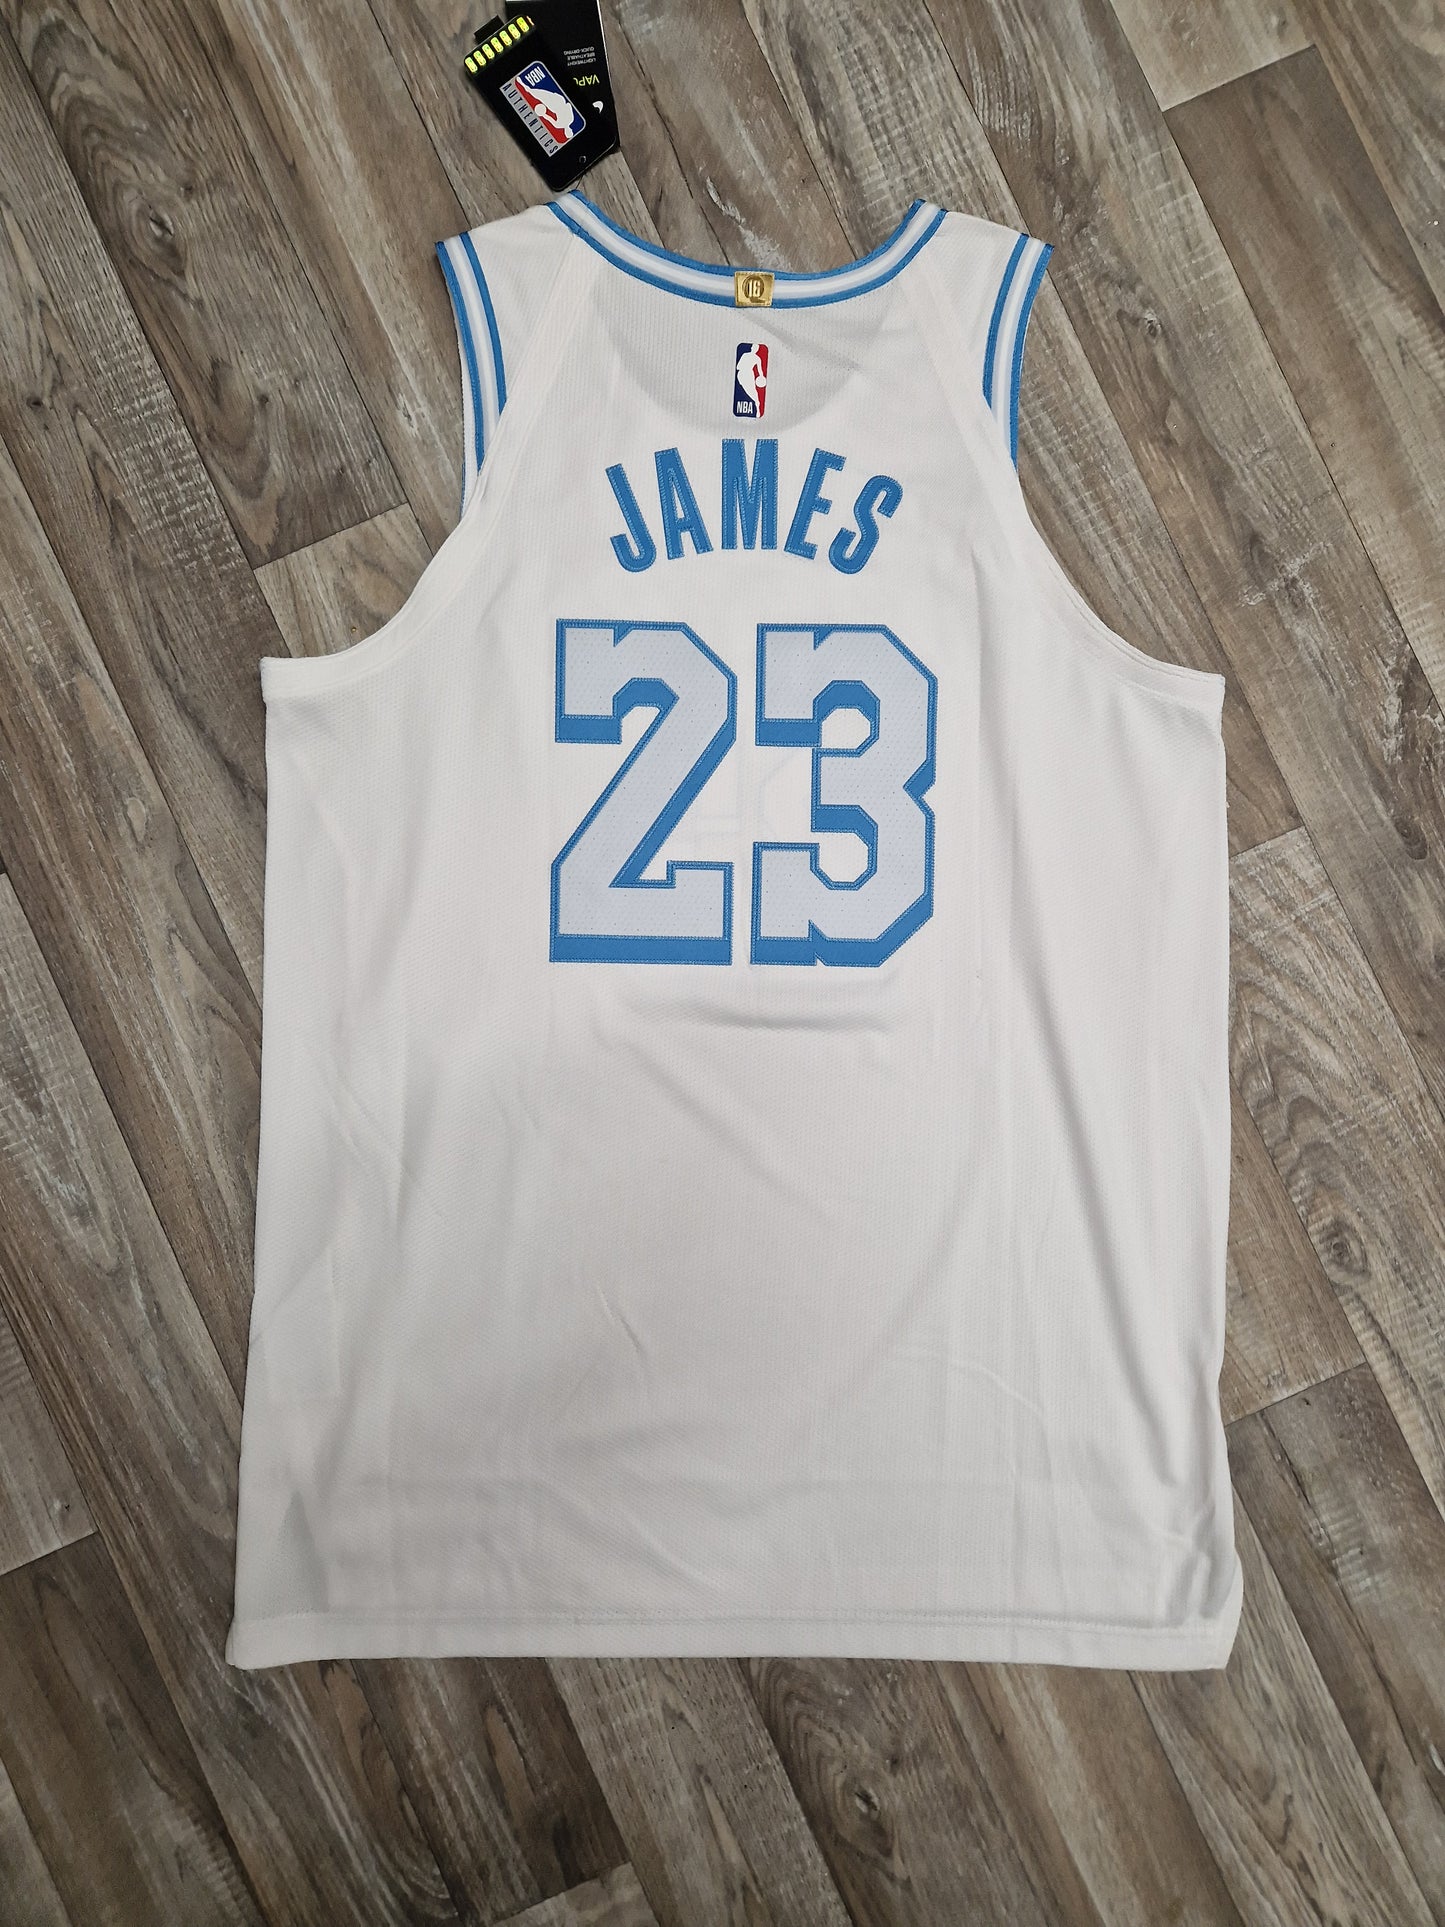 LeBron James Authentic Los Angeles Lakers Jersey Size Large